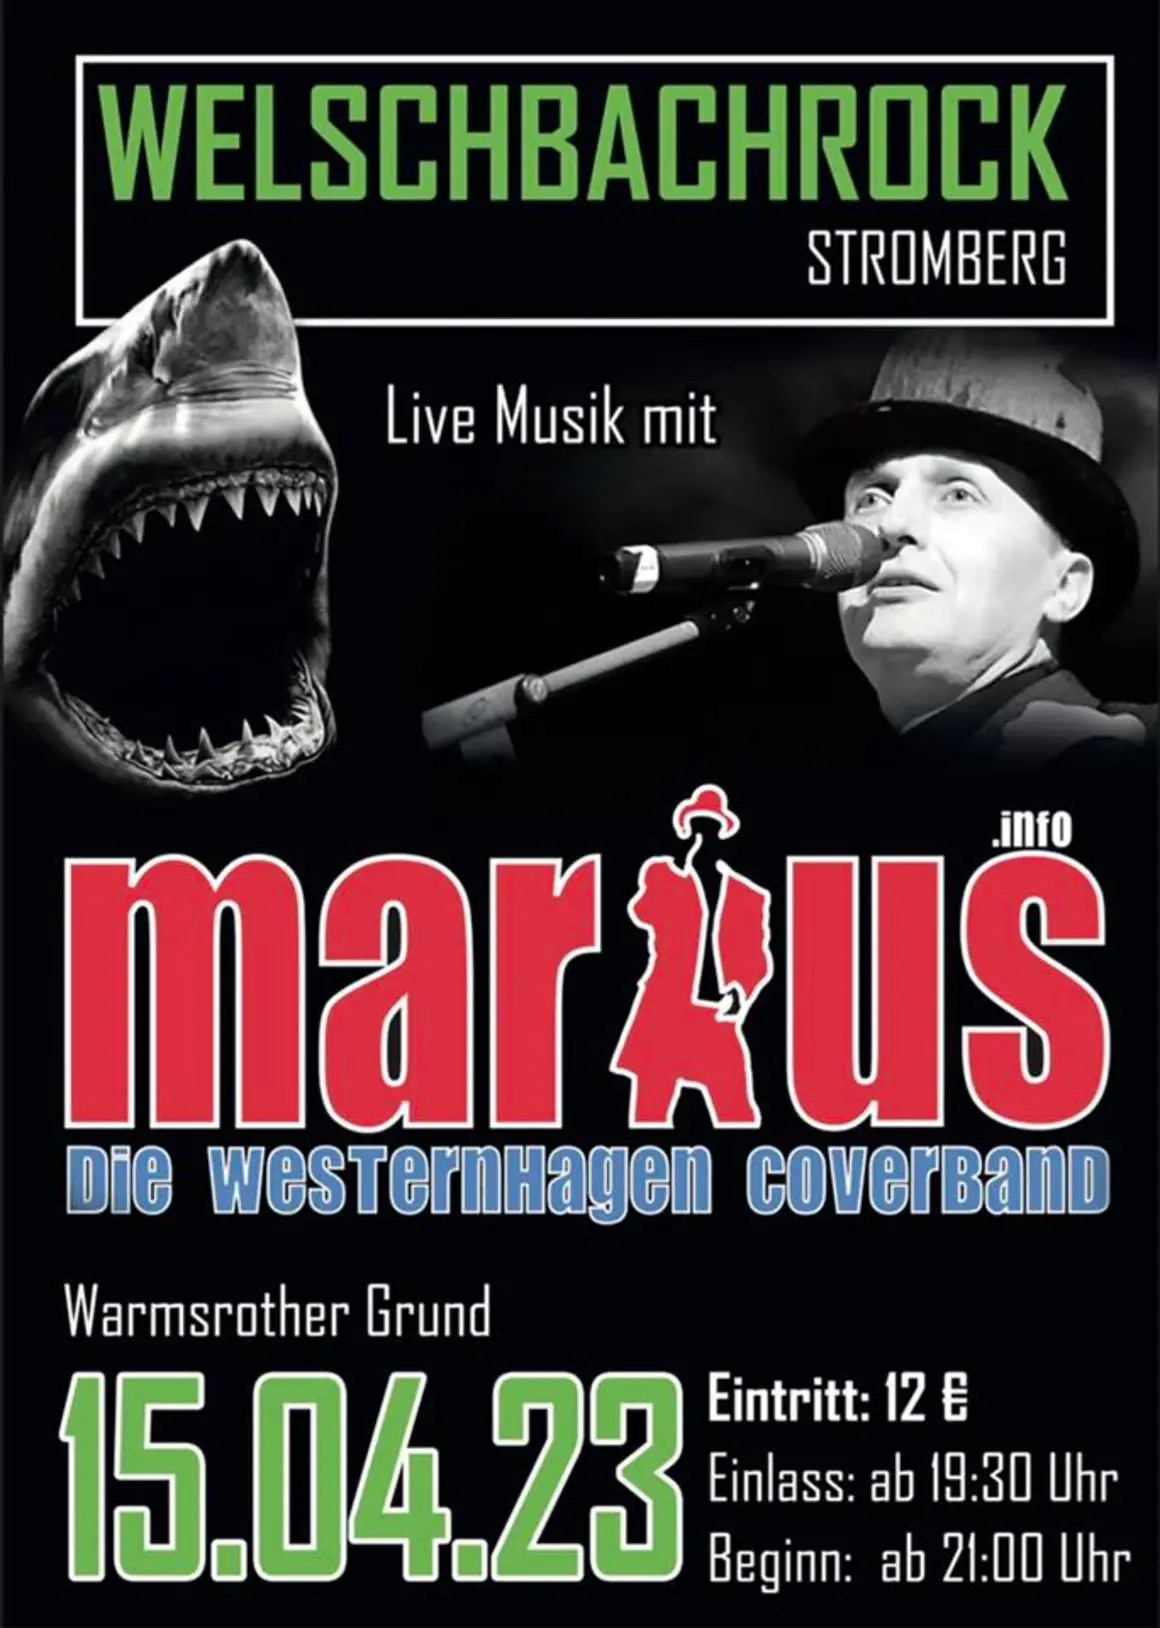 MMW-Coverband in Stromberg